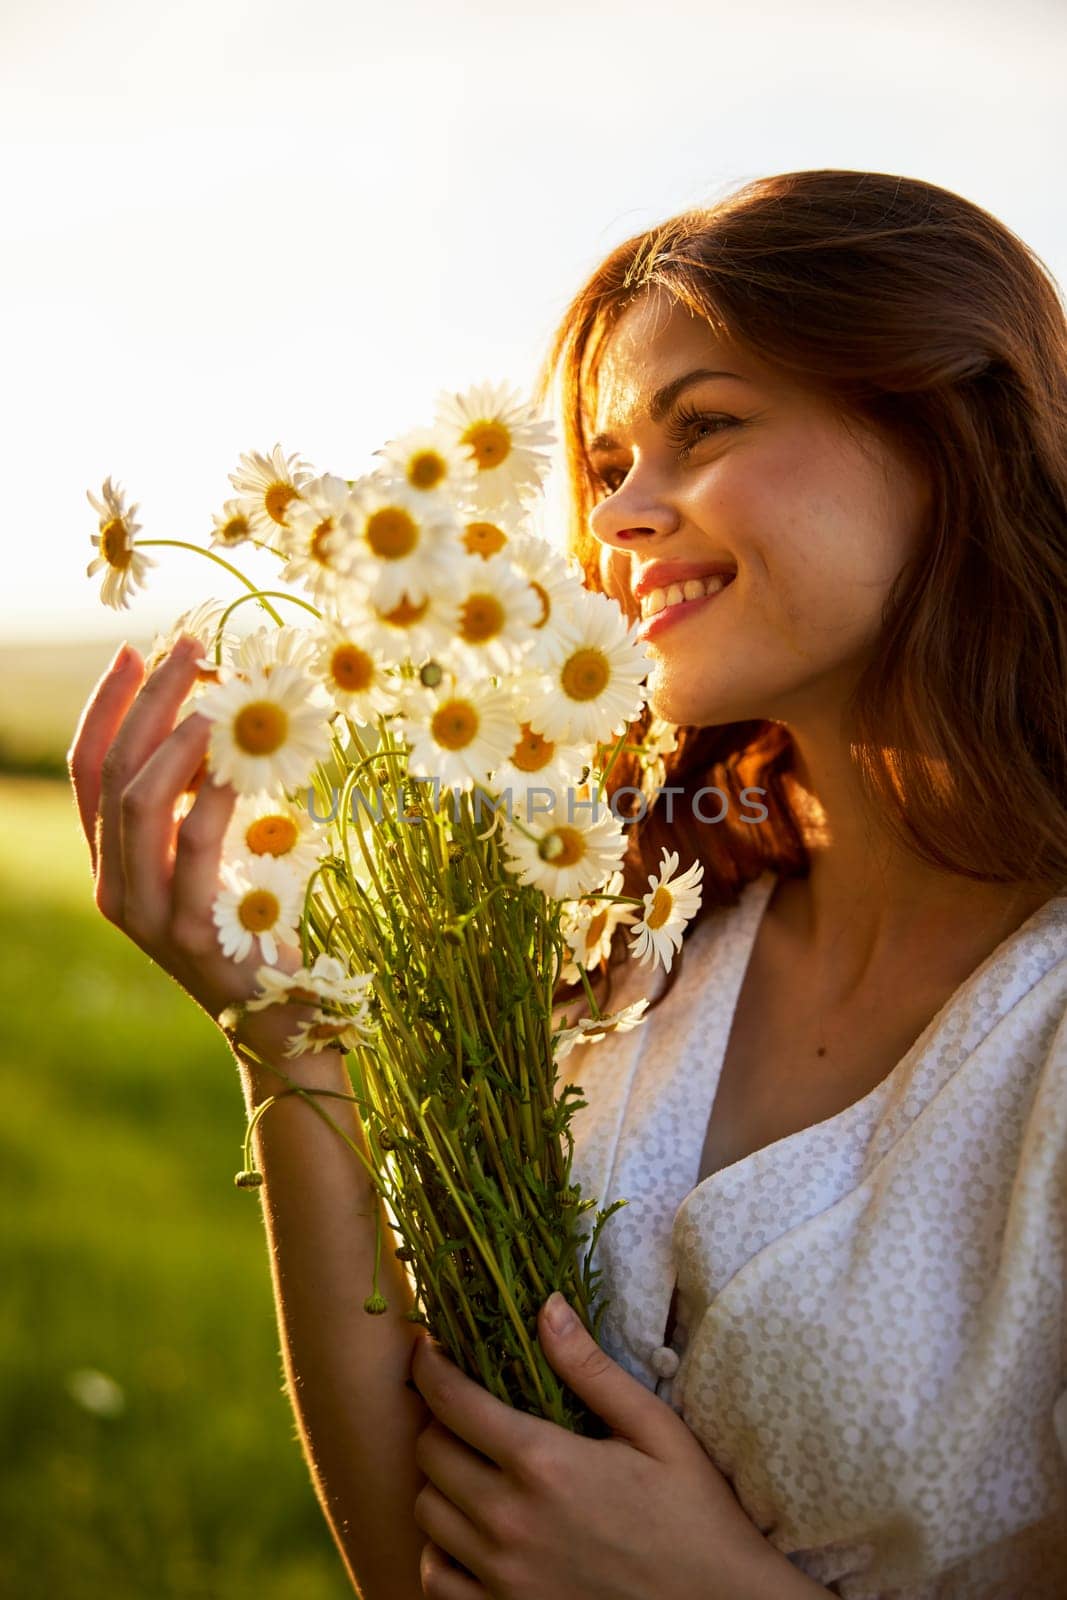 close-up portrait of a woman in a light dress in a field during sunset with a bouquet of daisies in her hands in backlight. High quality photo